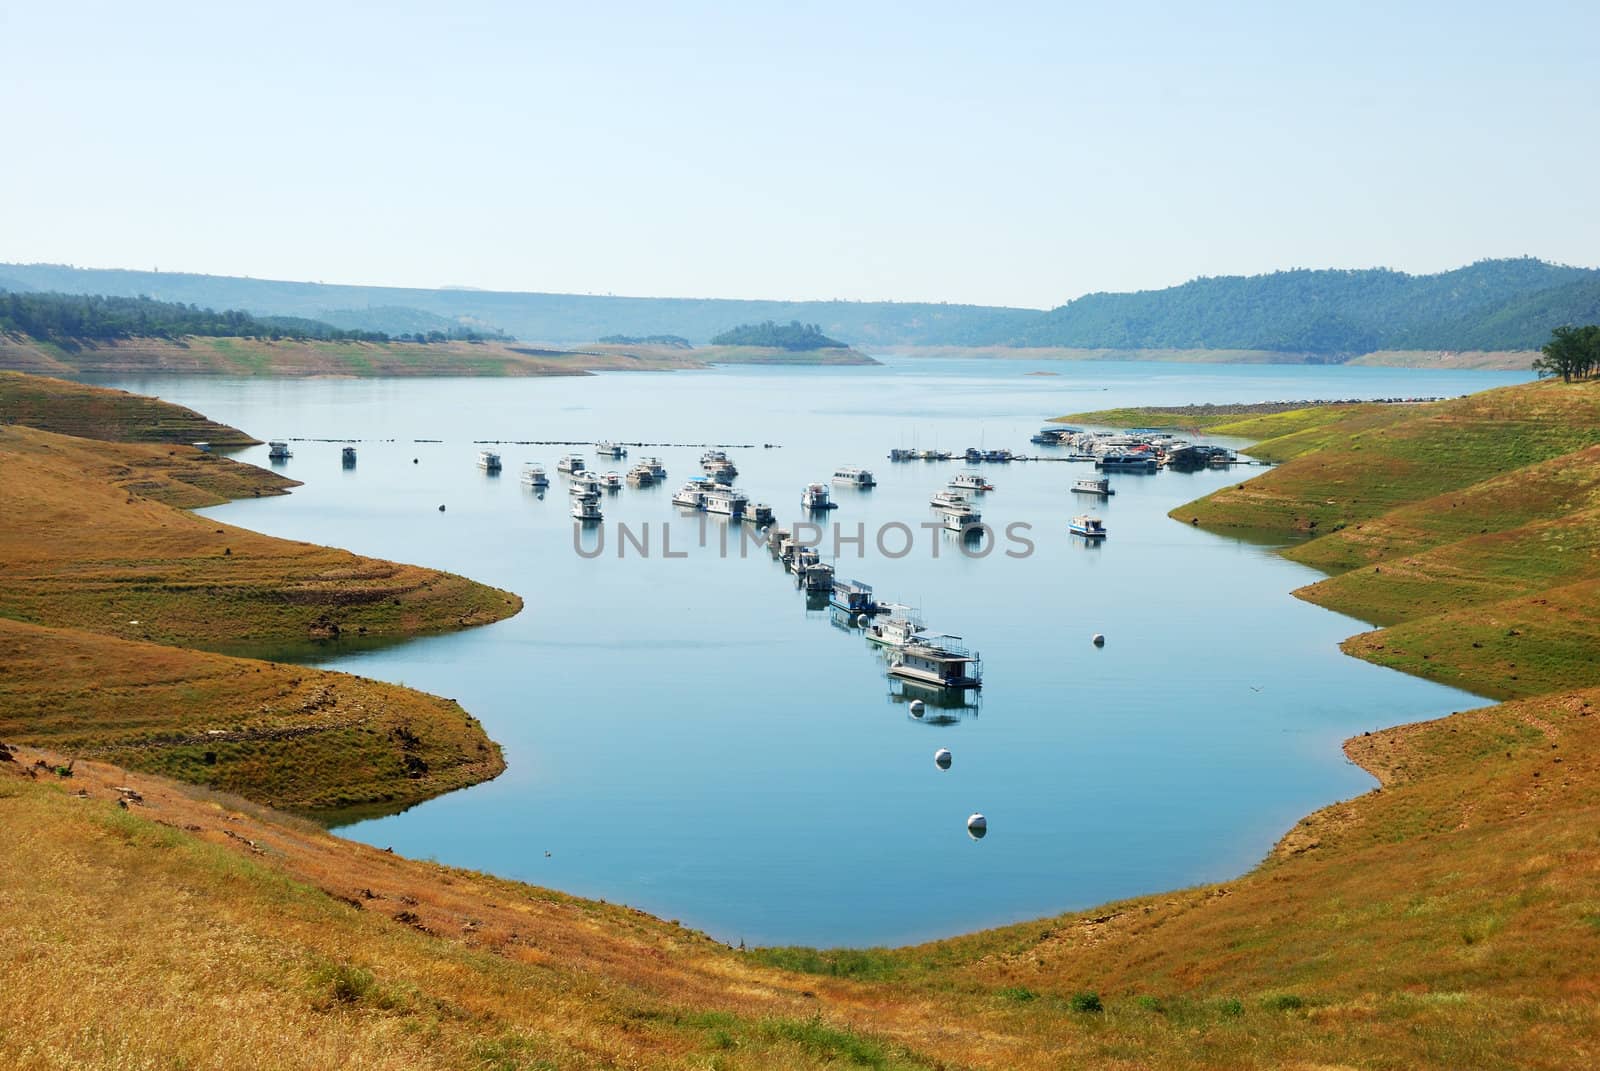 A line of houseboats on the New Melones Lake in California.